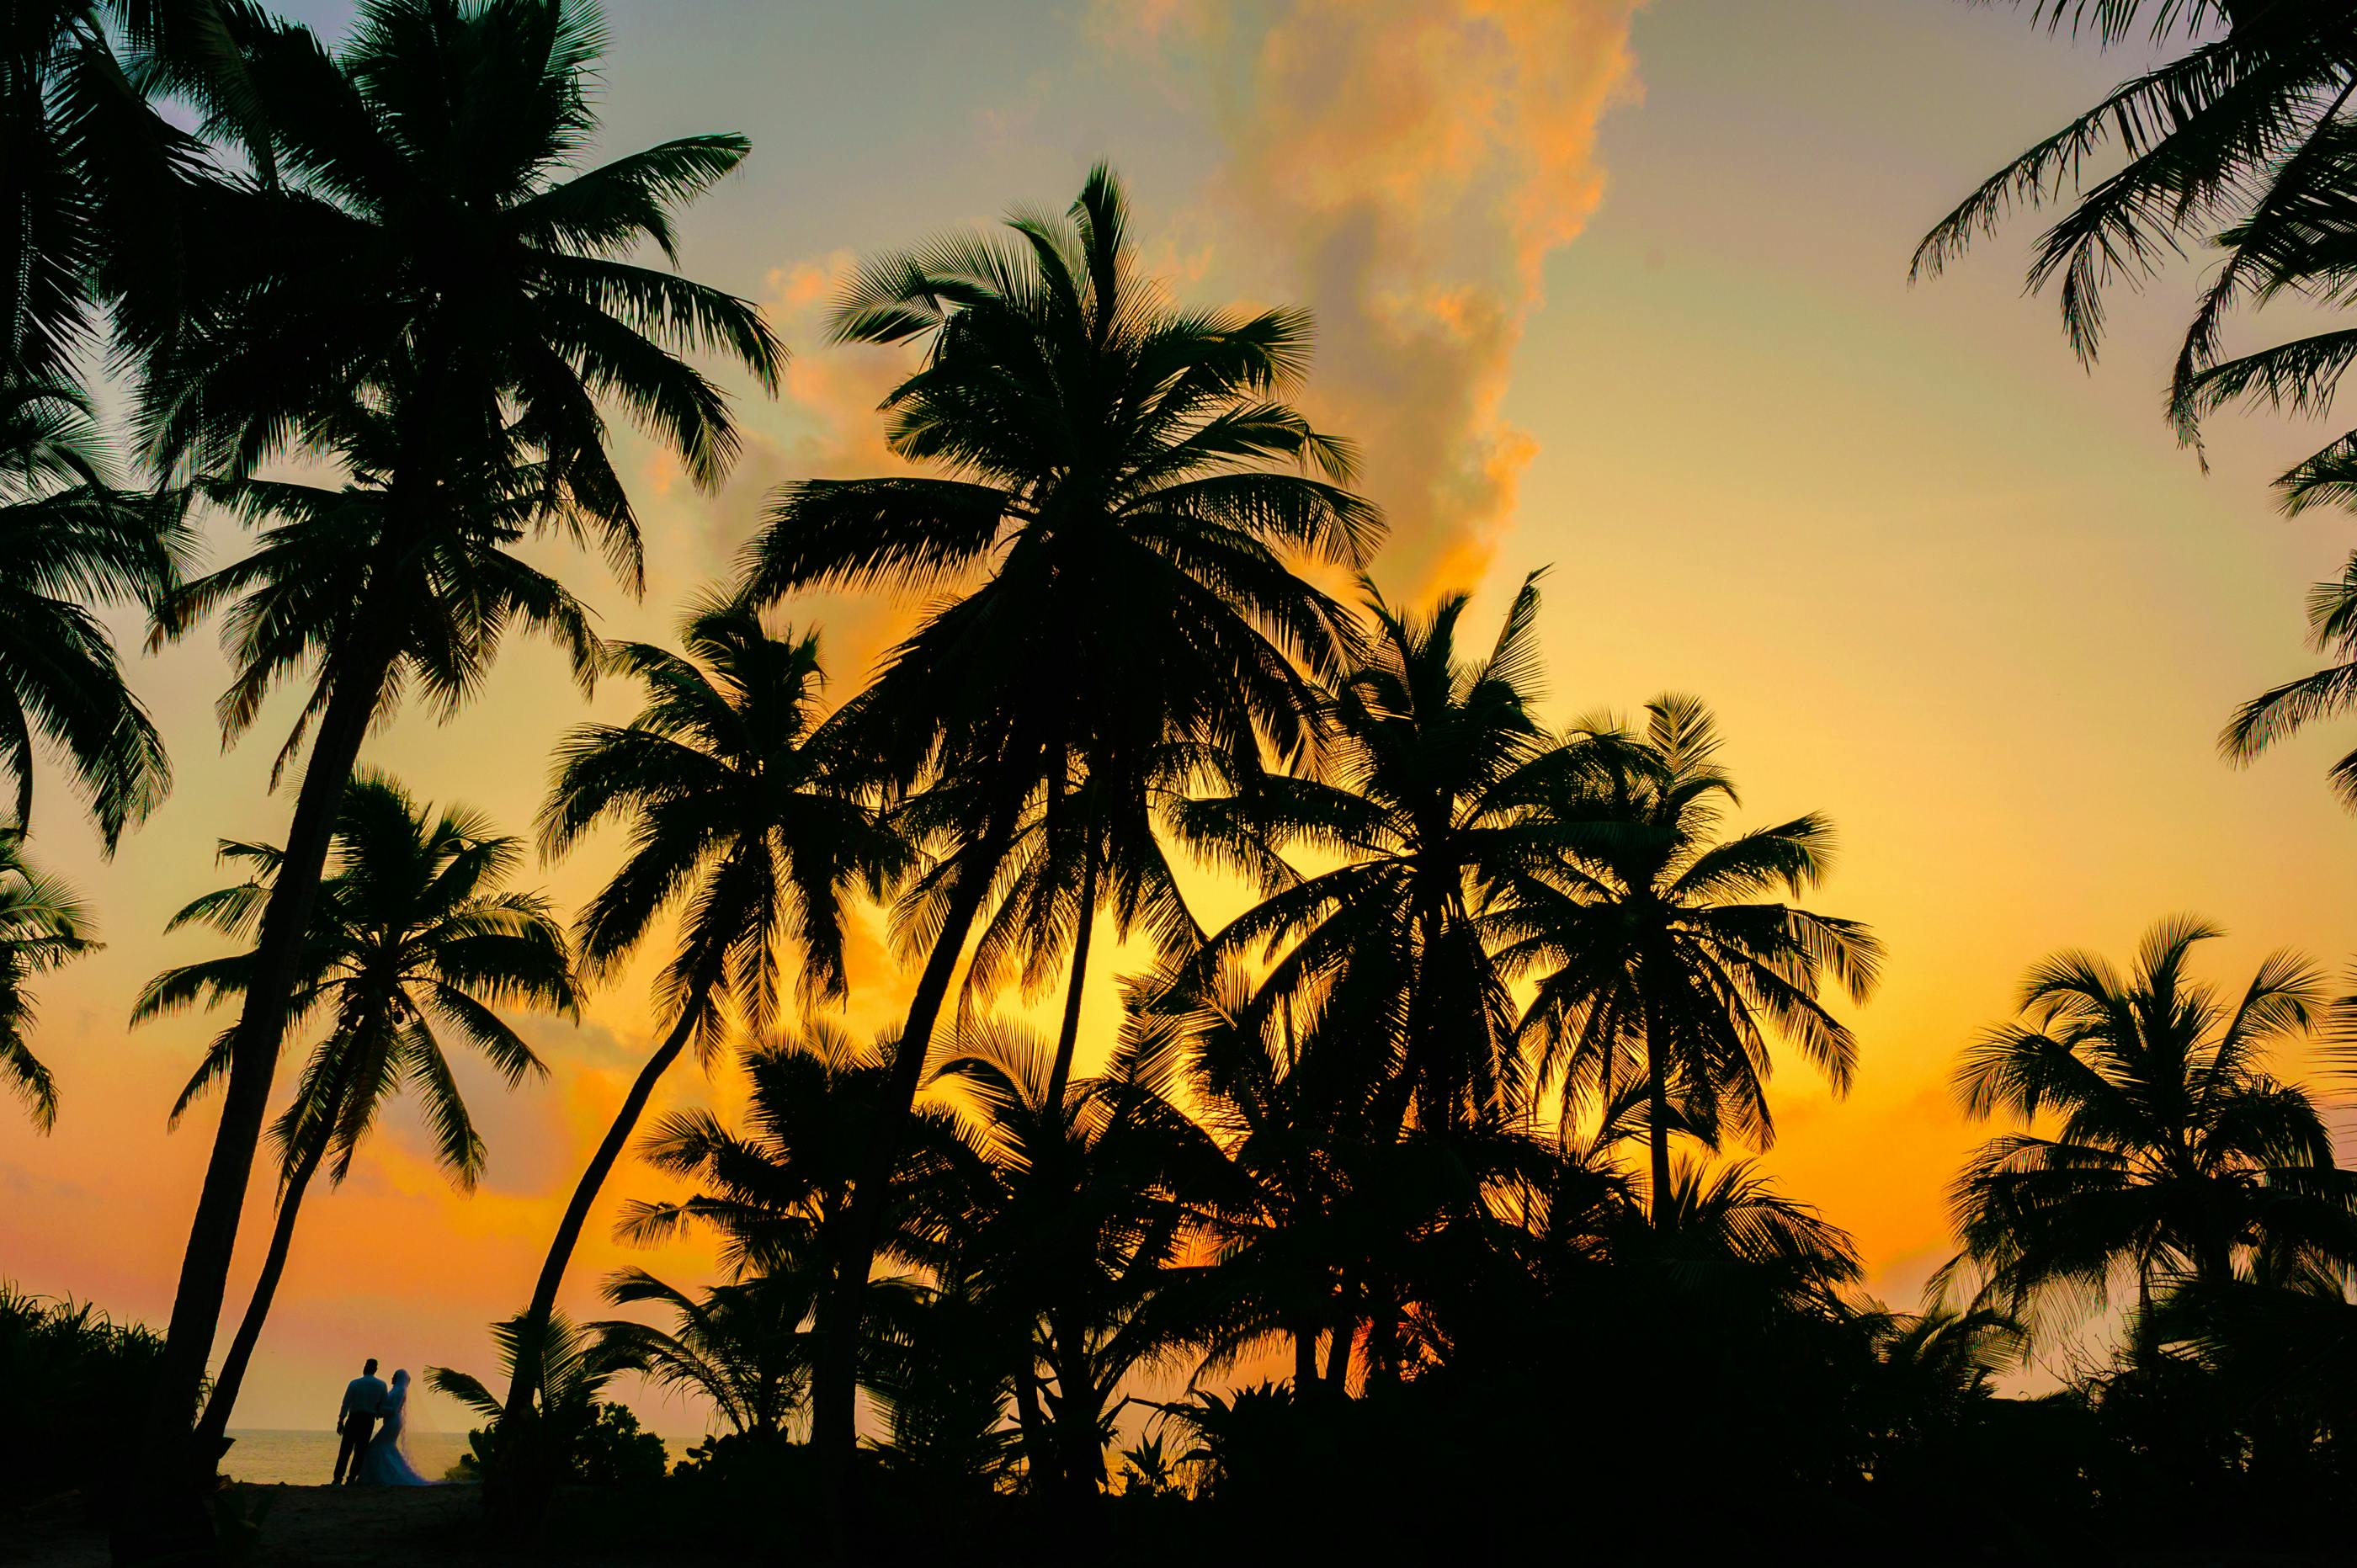 Coconut trees during sunset | Source: Pexels